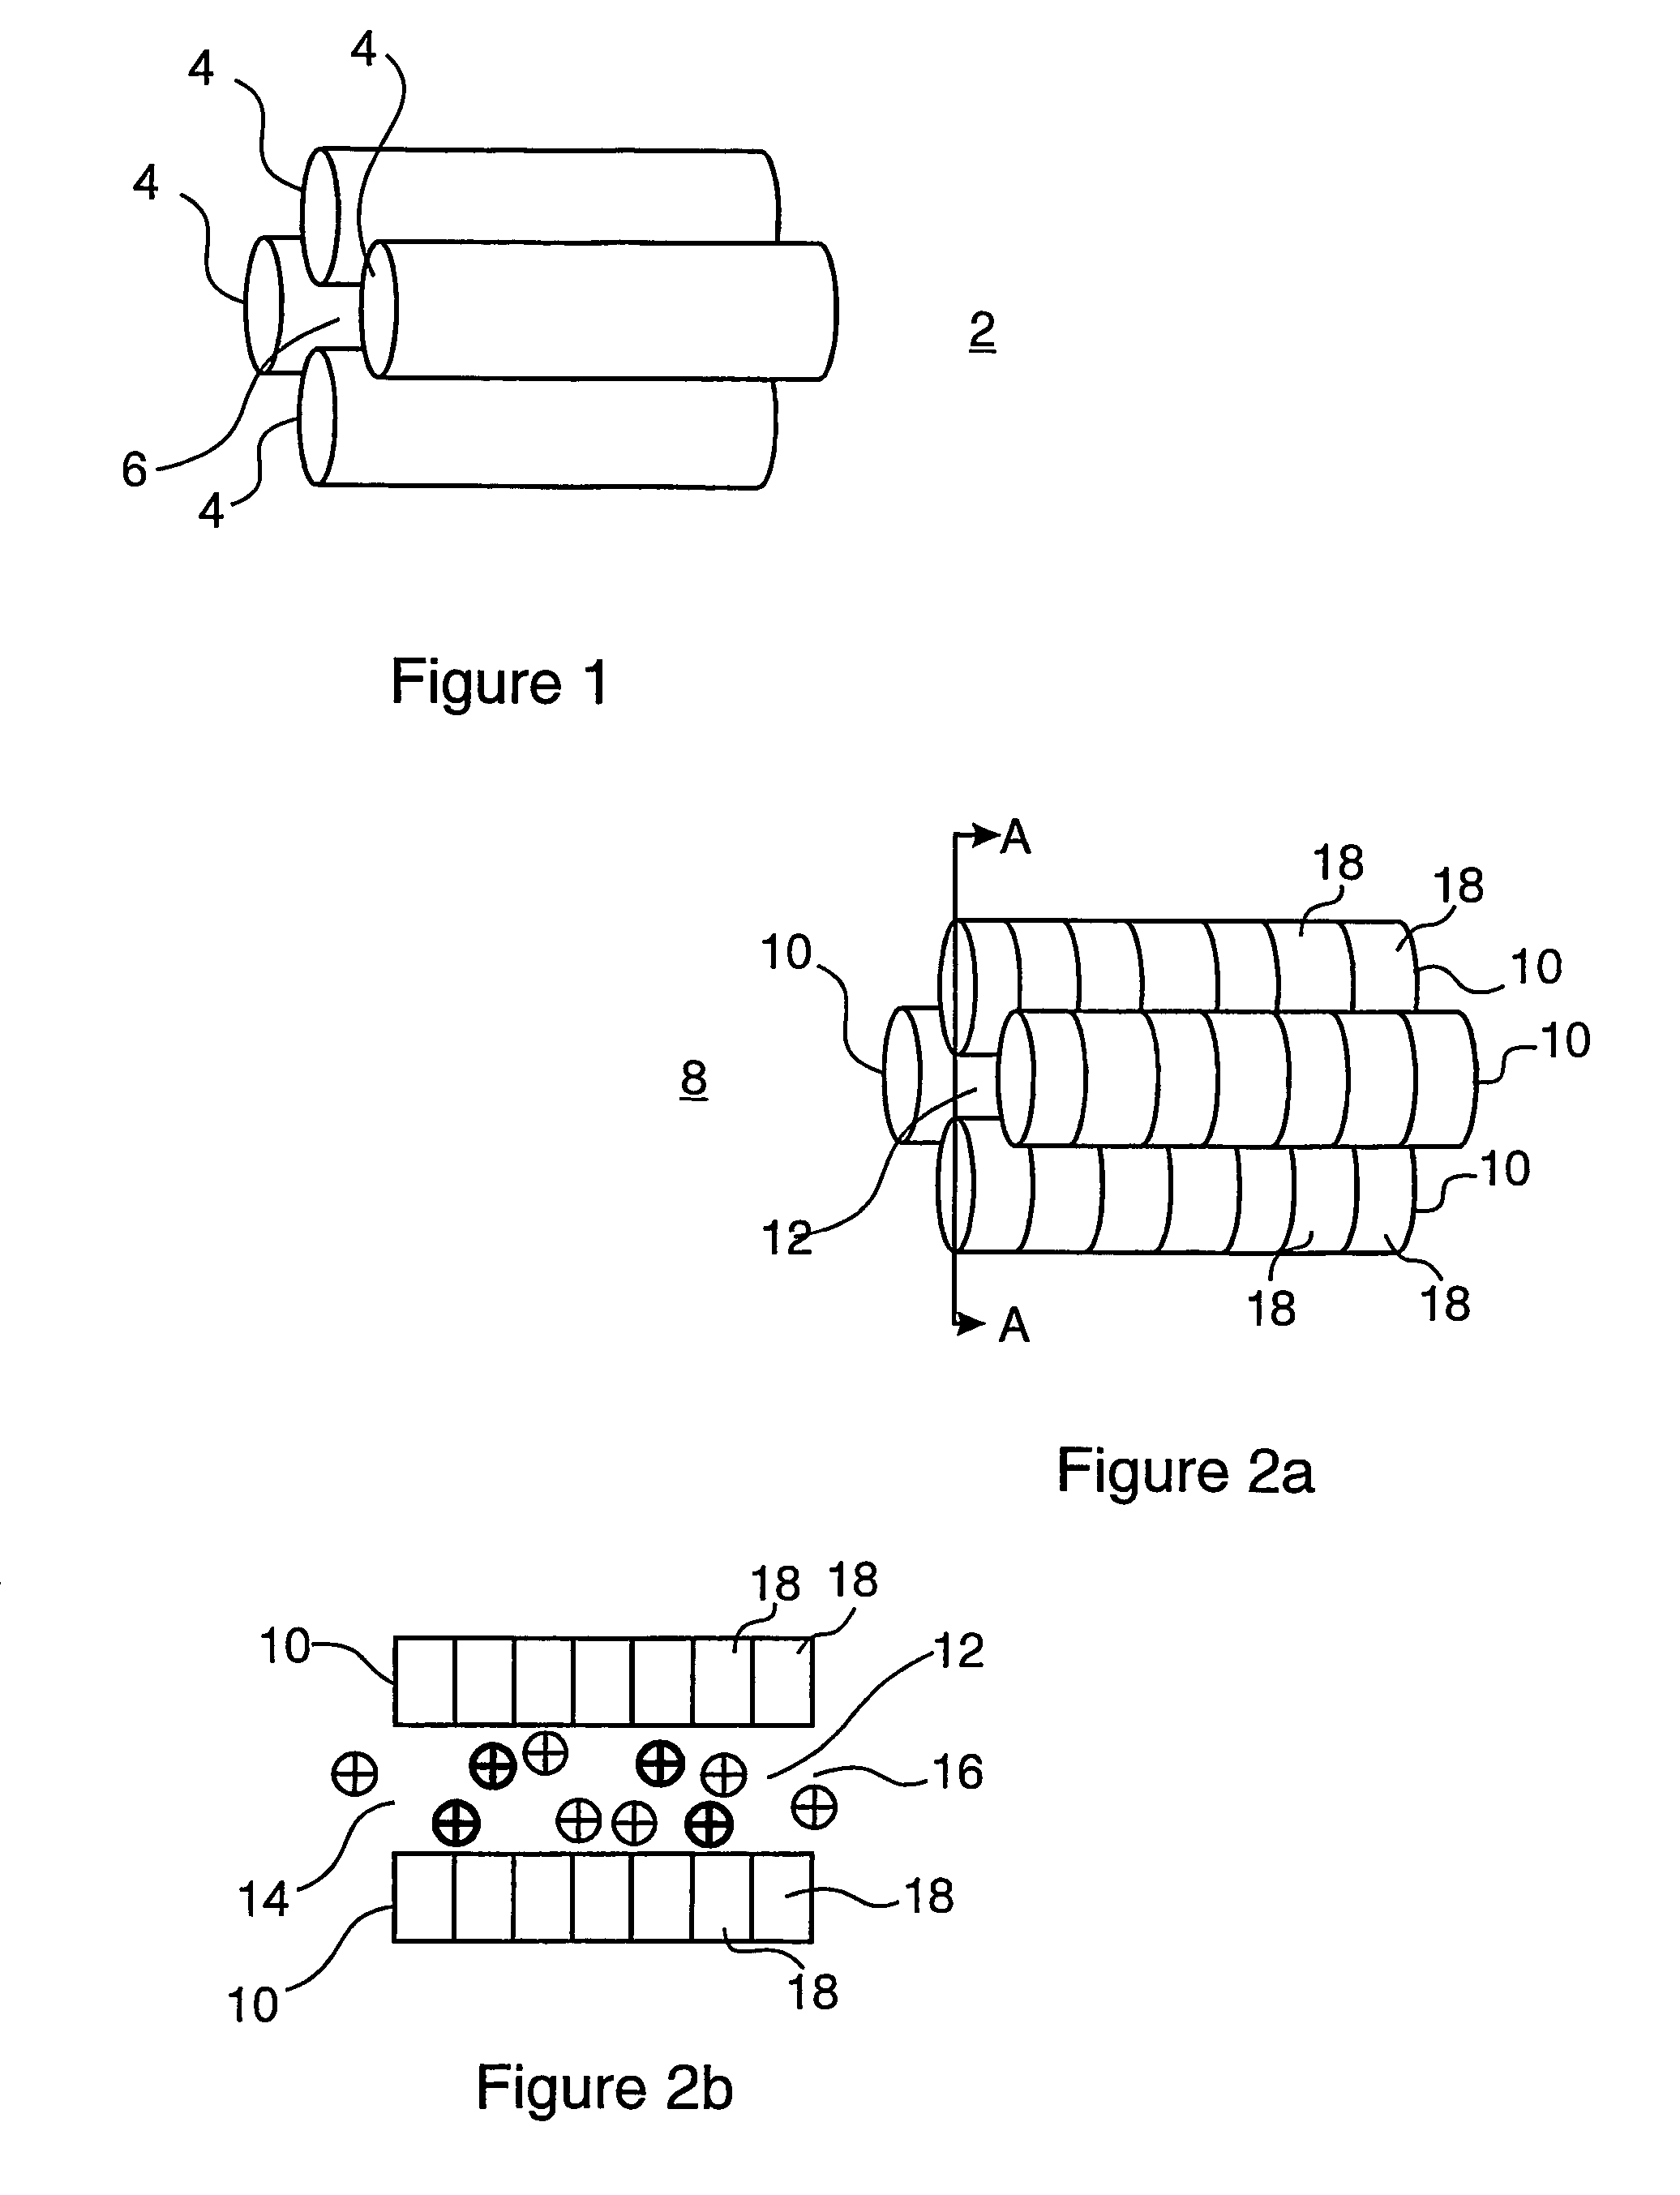 FAIMS apparatus and method for separating ions in the gas phase